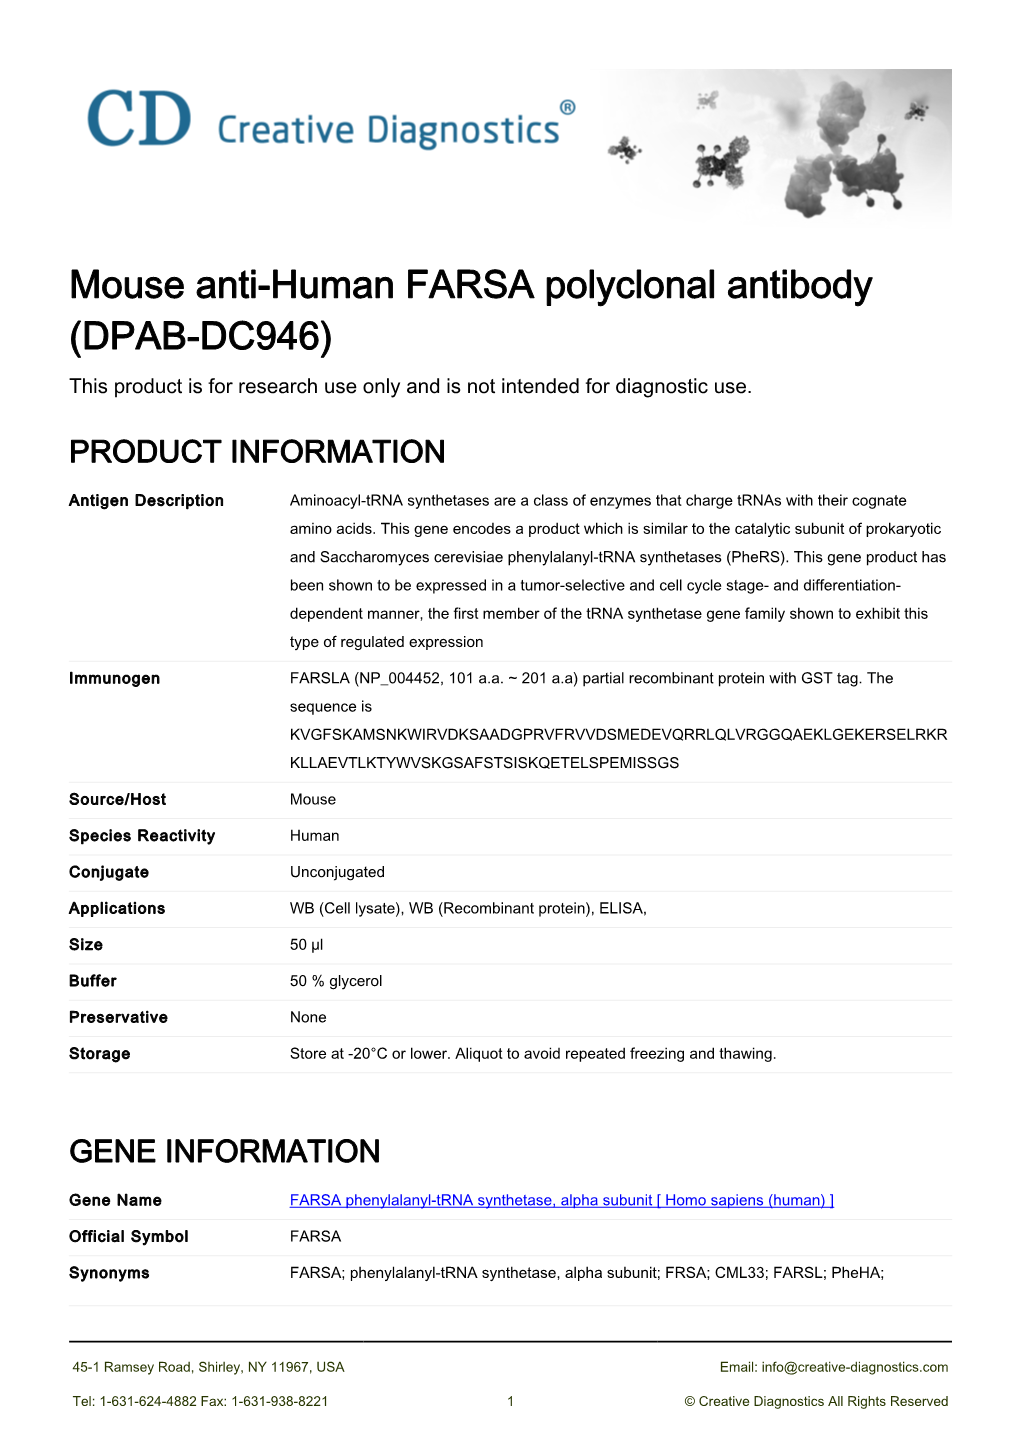 Mouse Anti-Human FARSA Polyclonal Antibody (DPAB-DC946) This Product Is for Research Use Only and Is Not Intended for Diagnostic Use